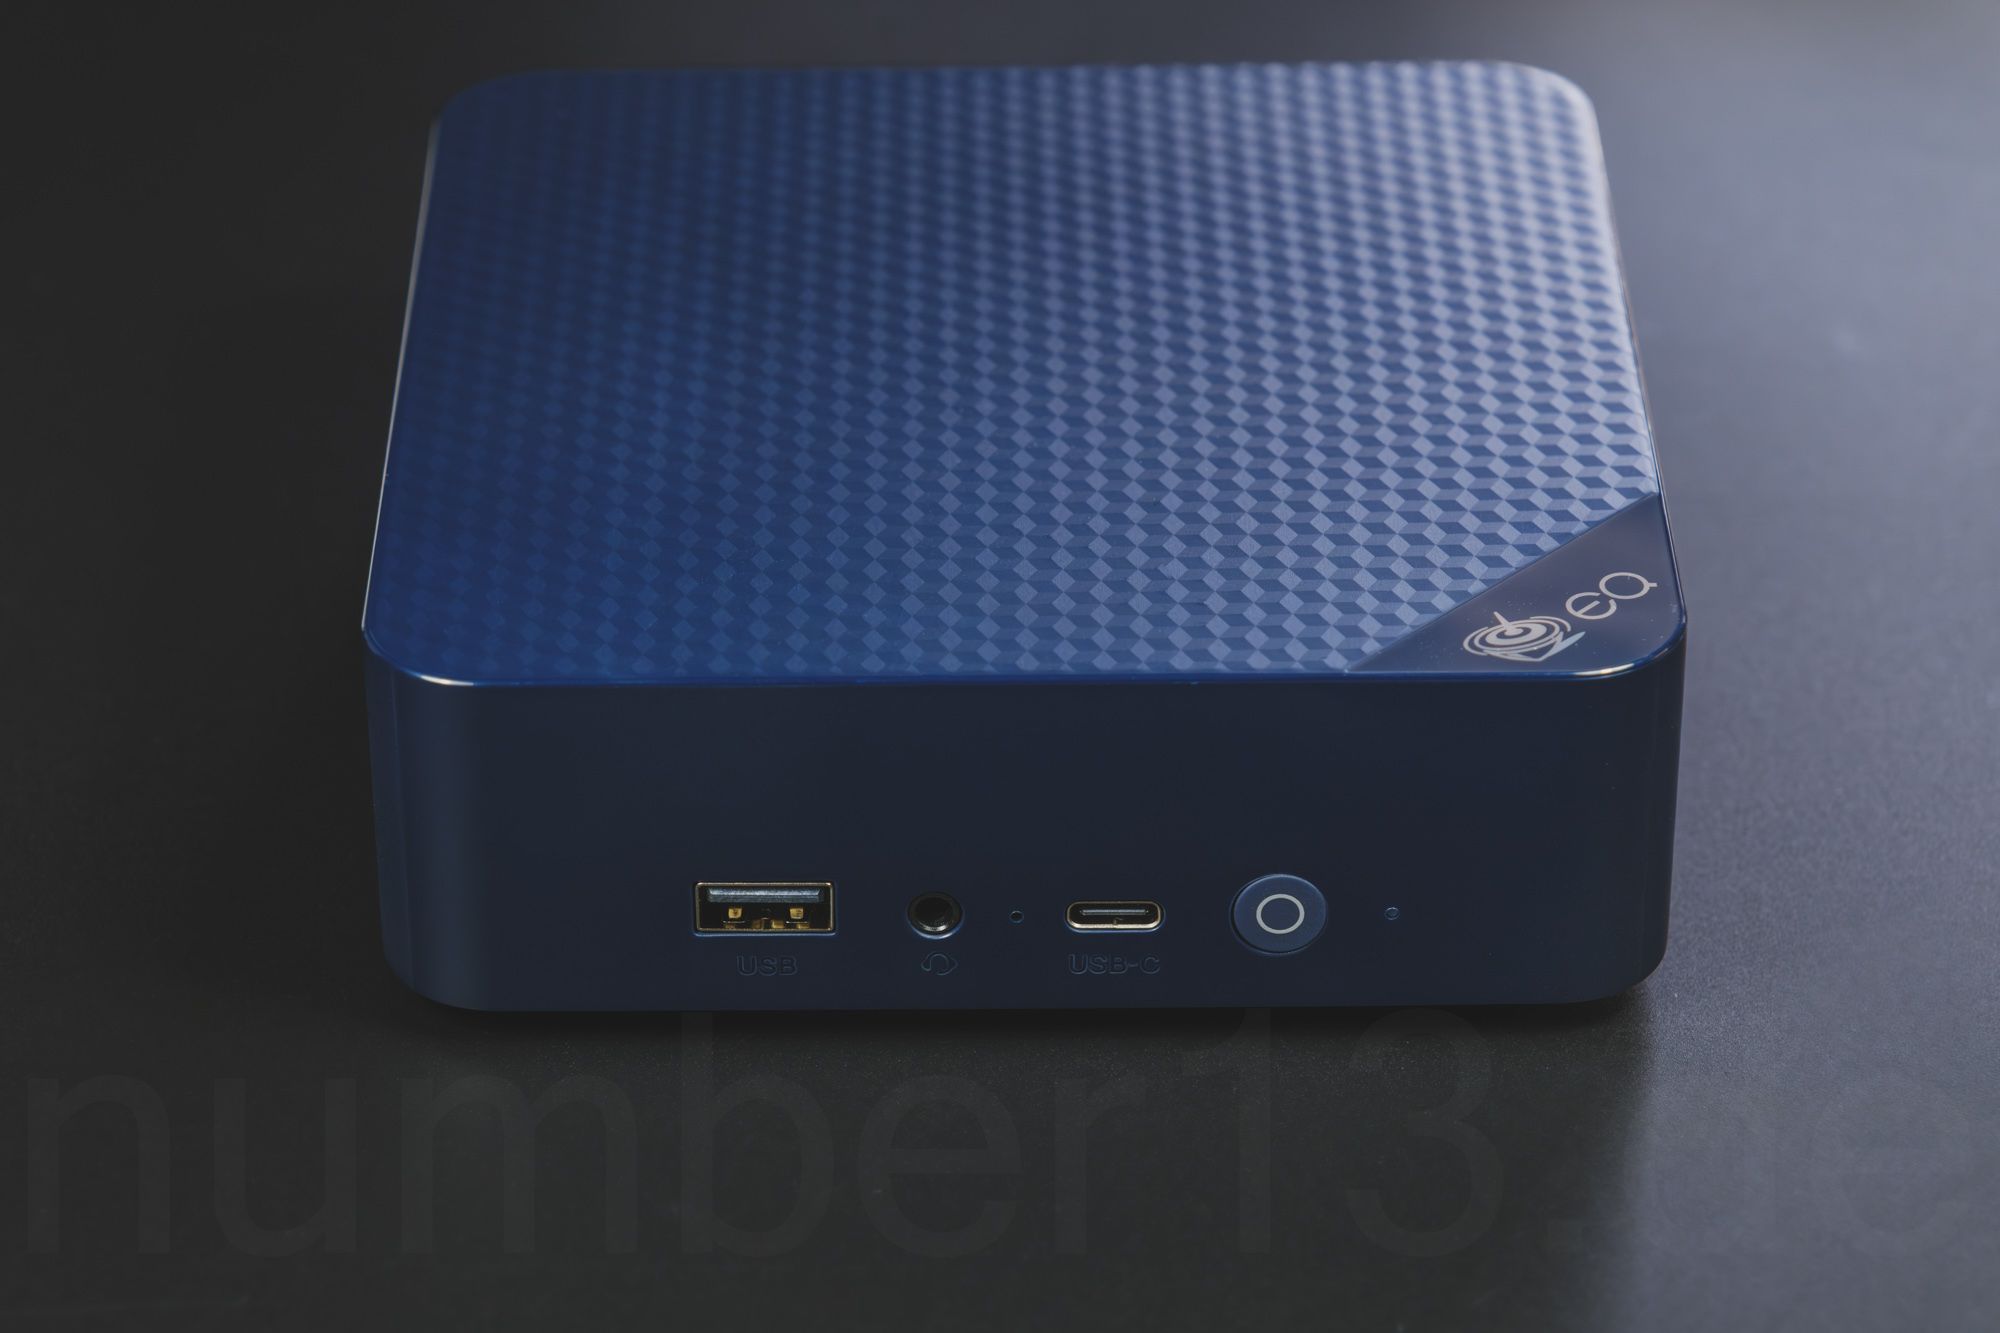 Review: Beelink EQ13 Mini-PC with Intel N200 and Dual LAN